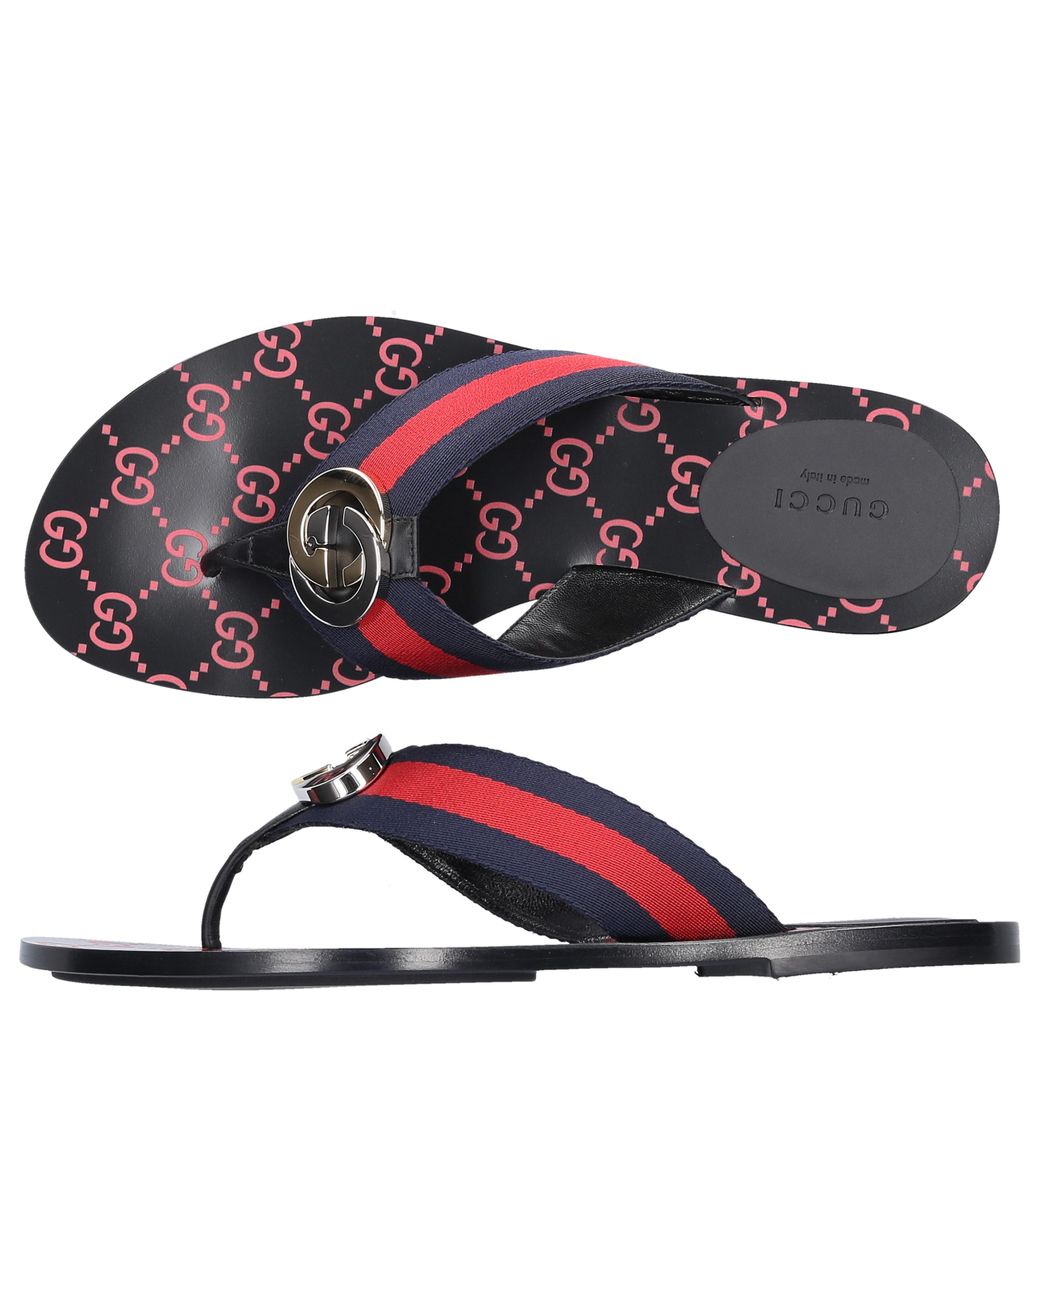 Gucci Cotton Flip Flops Kika in Blue/Red (Blue) - Save 7% - Lyst